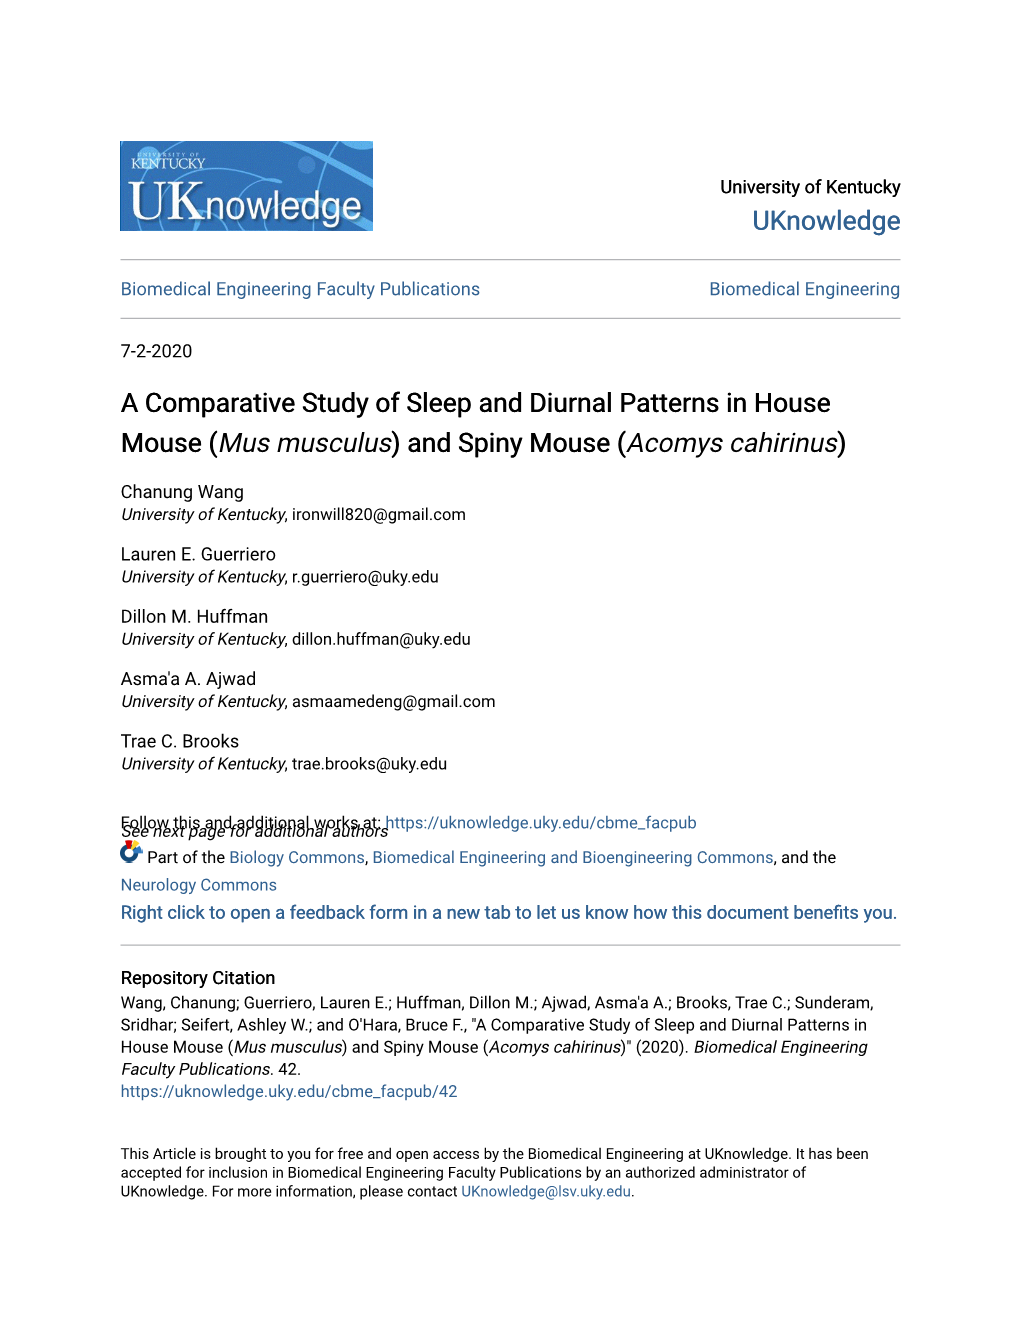 A Comparative Study of Sleep and Diurnal Patterns in House Mouse (Mus Musculus) and Spiny Mouse (Acomys Cahirinus)